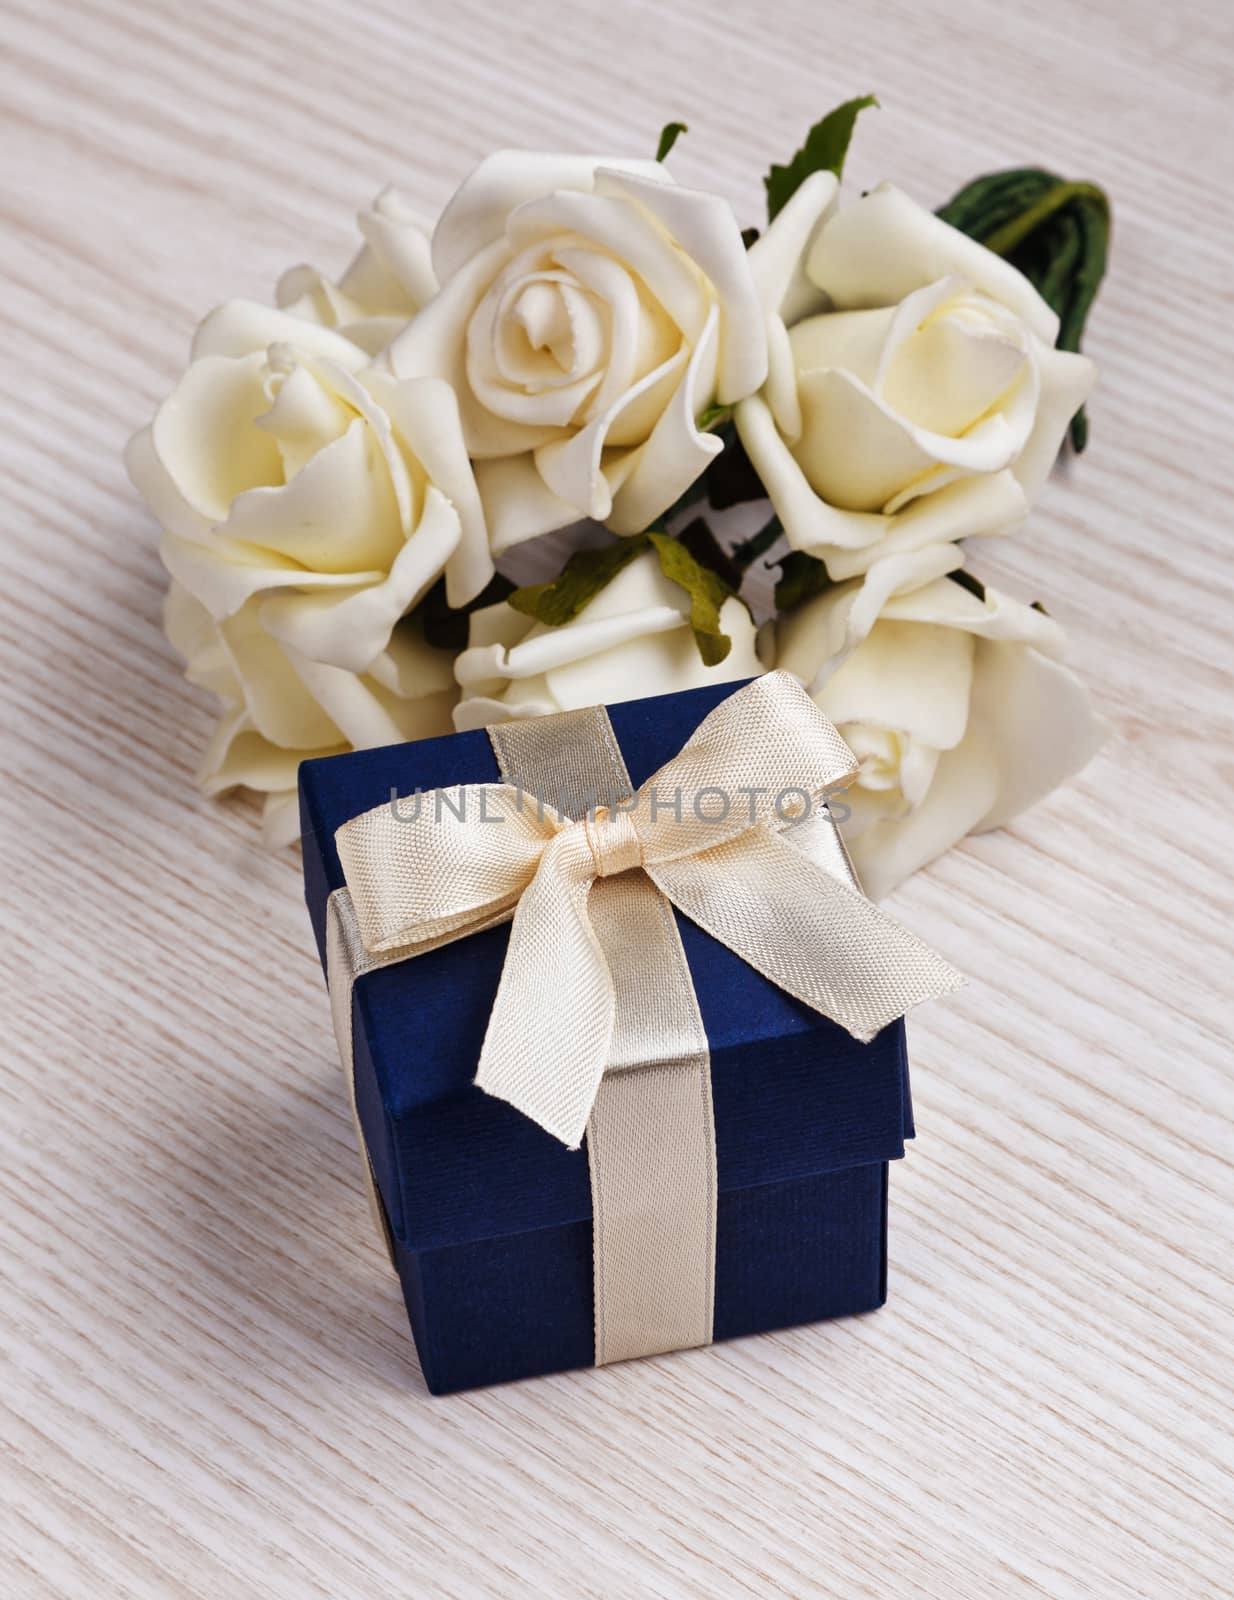 white flowers and blue gift box with white ribbon on wooden surface